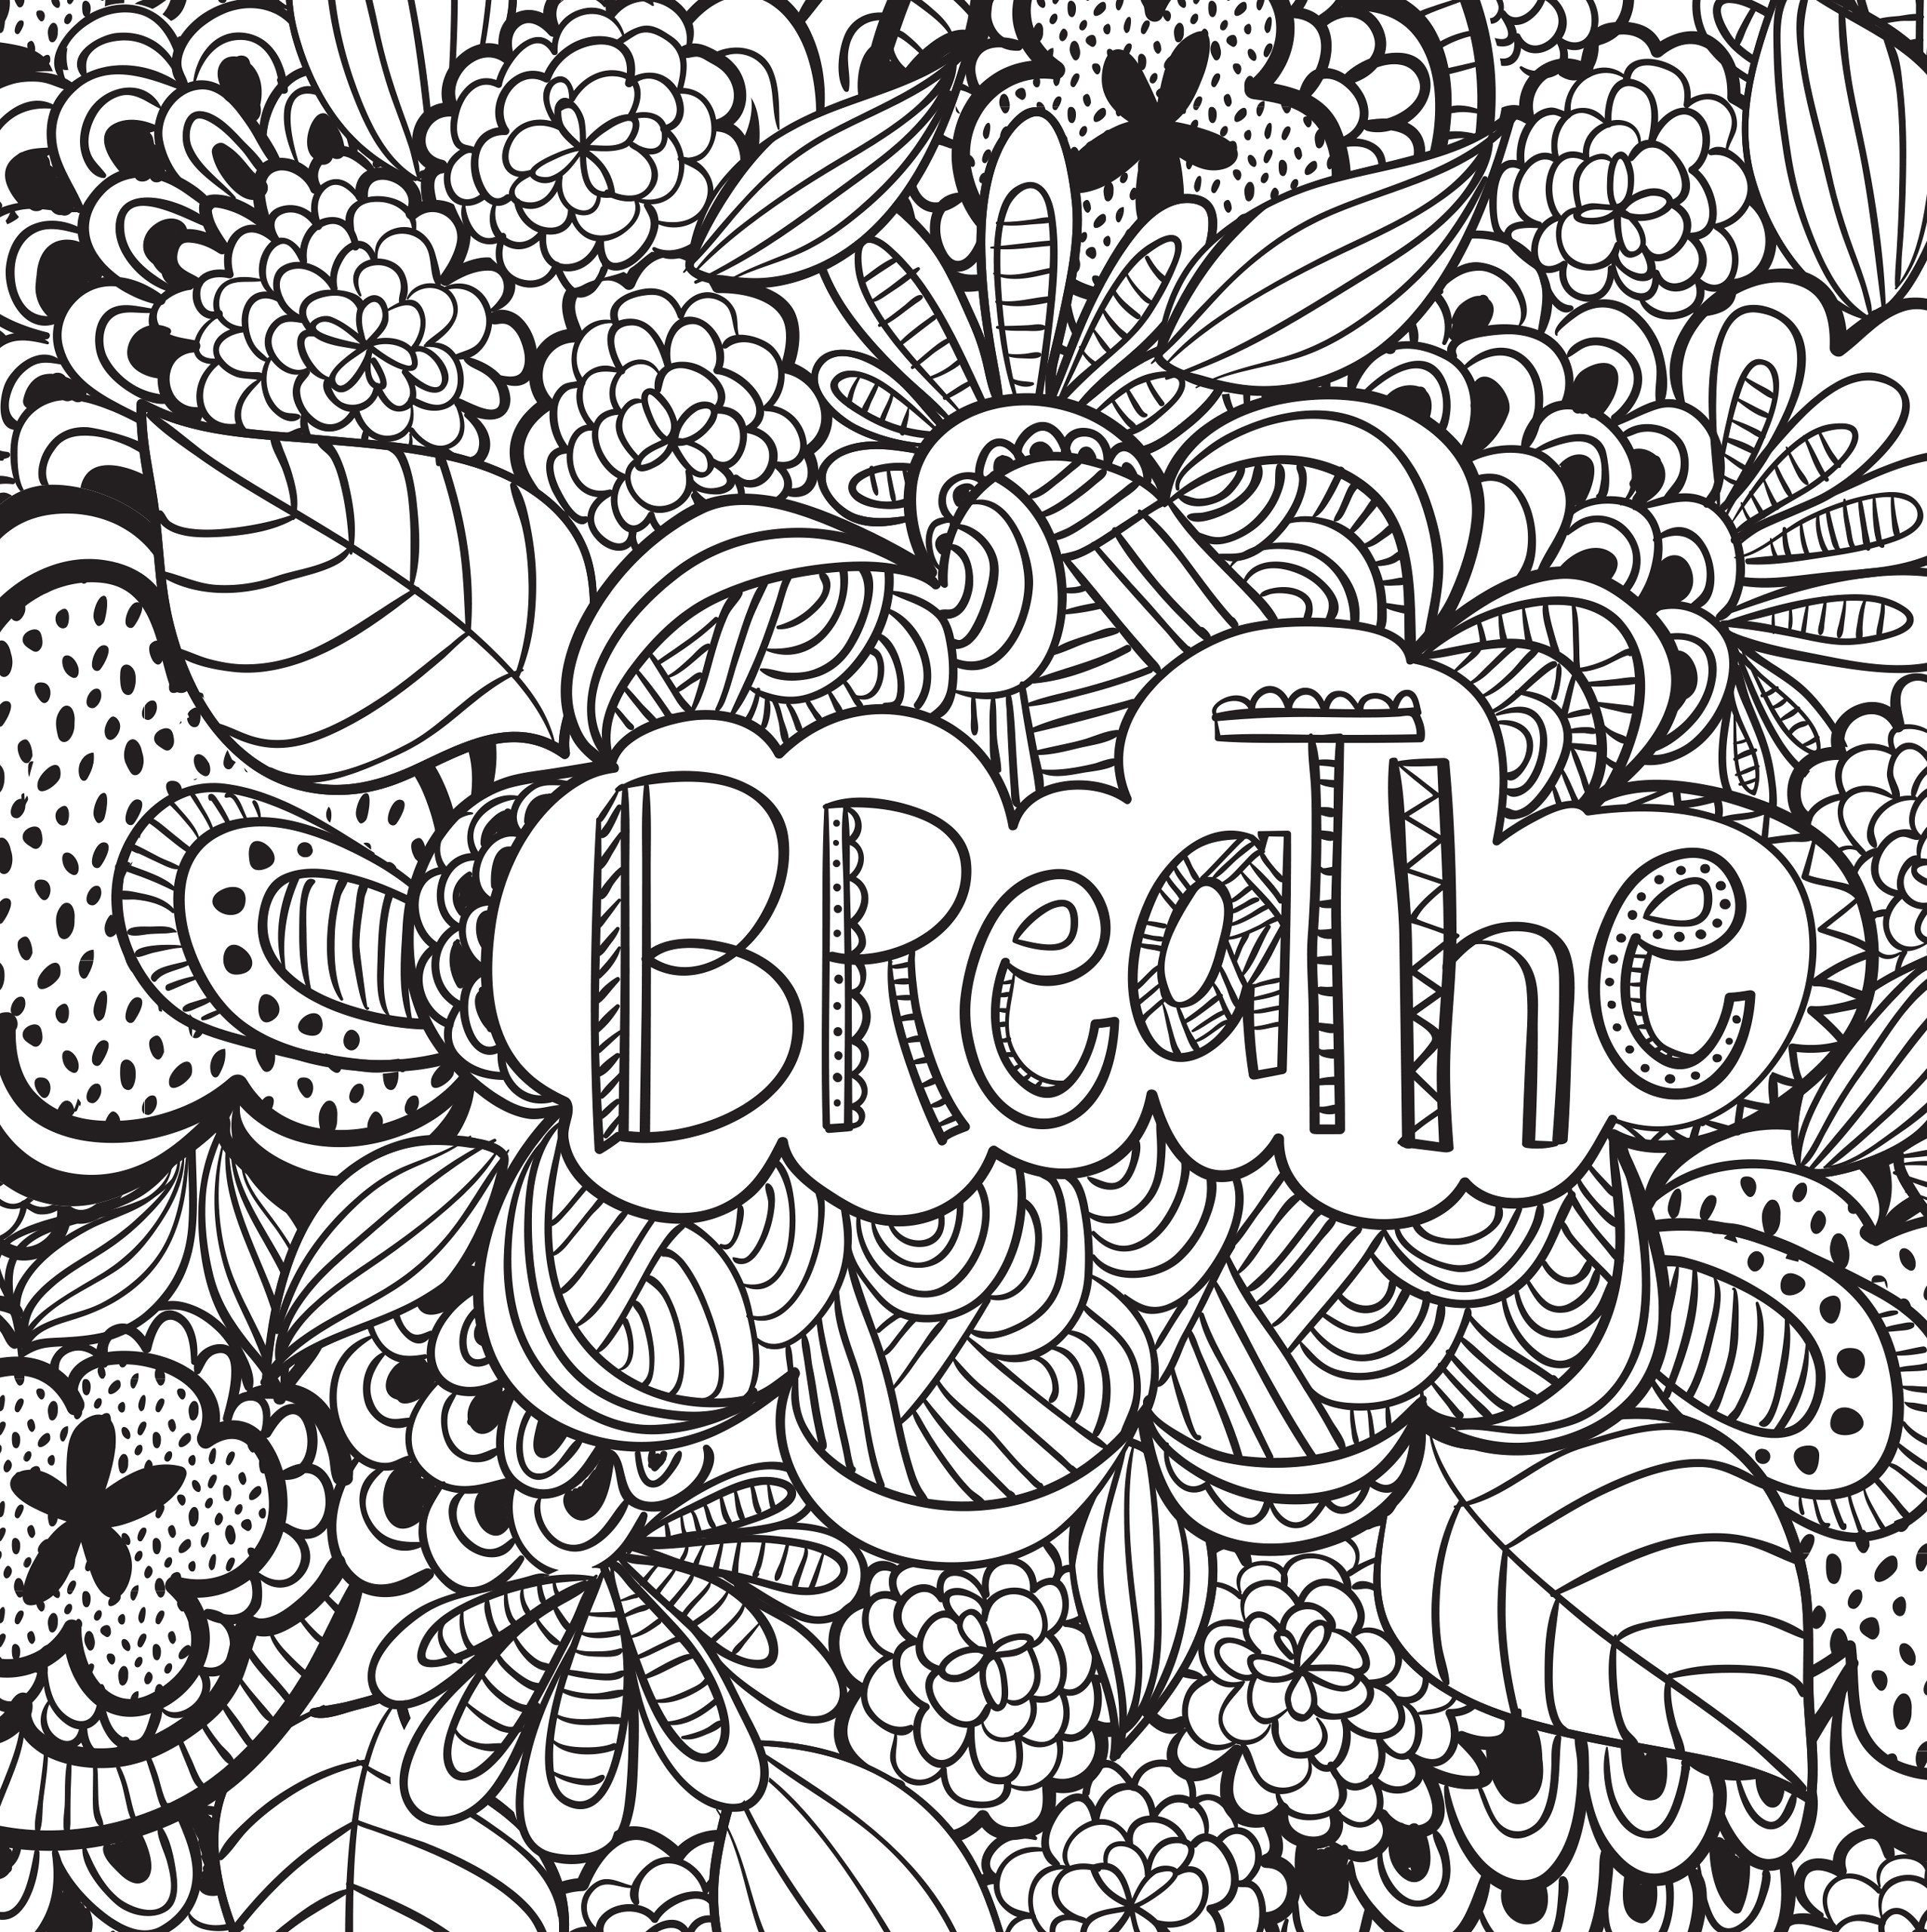 Stress Relief Coloring Pages
 Joyful Inspiration Adult Coloring Book 31 stress